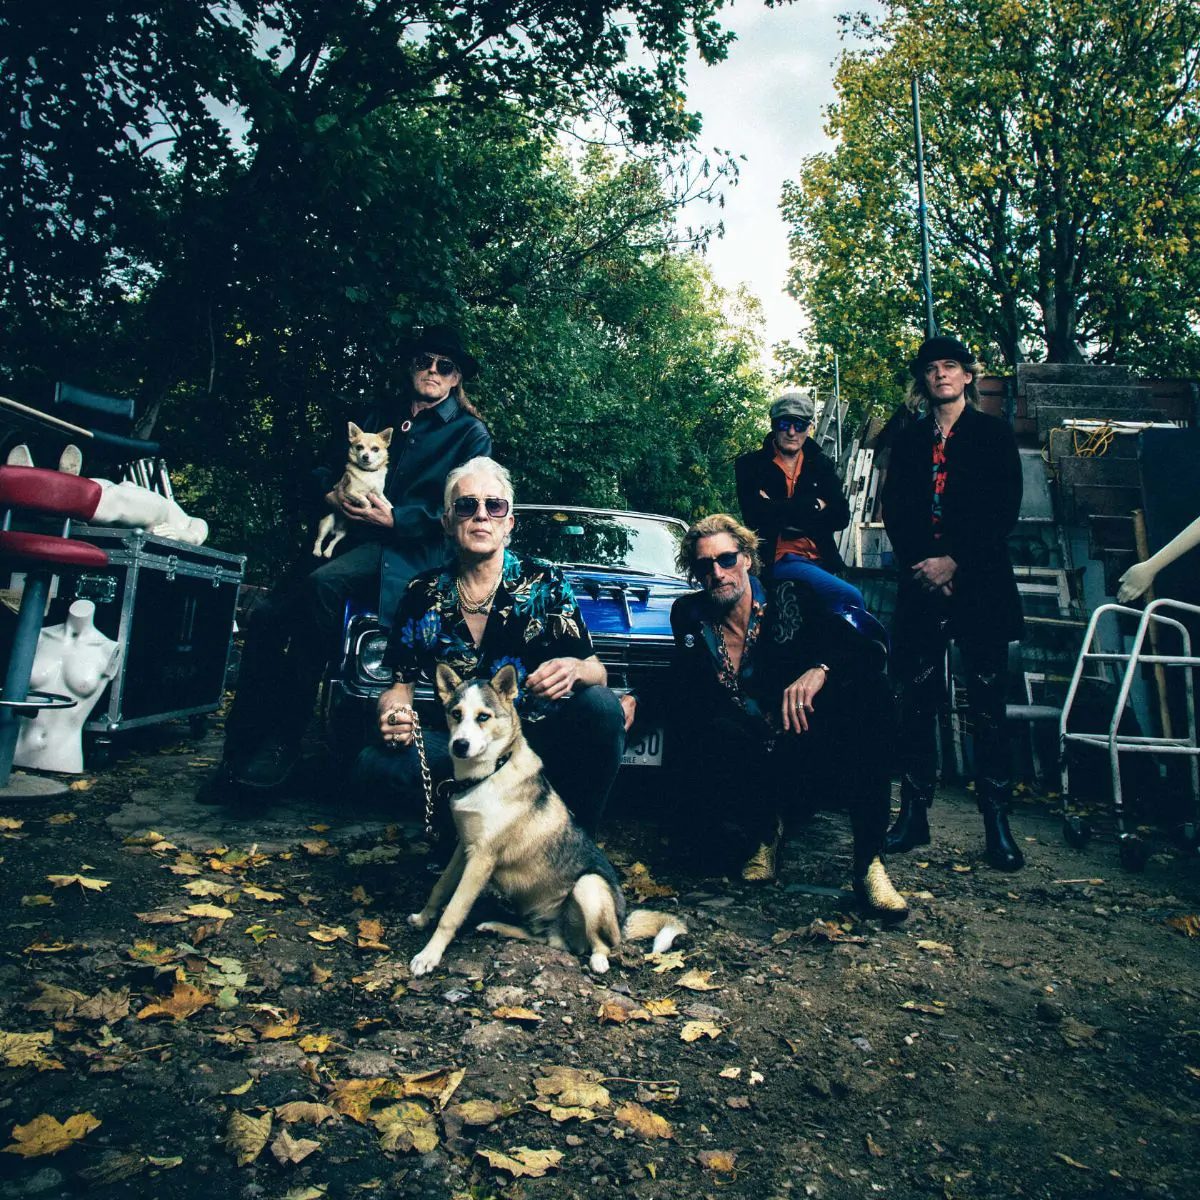 ALABAMA 3 return to The Sopranos & share new track ‘Petronella Says’ – Listen Now